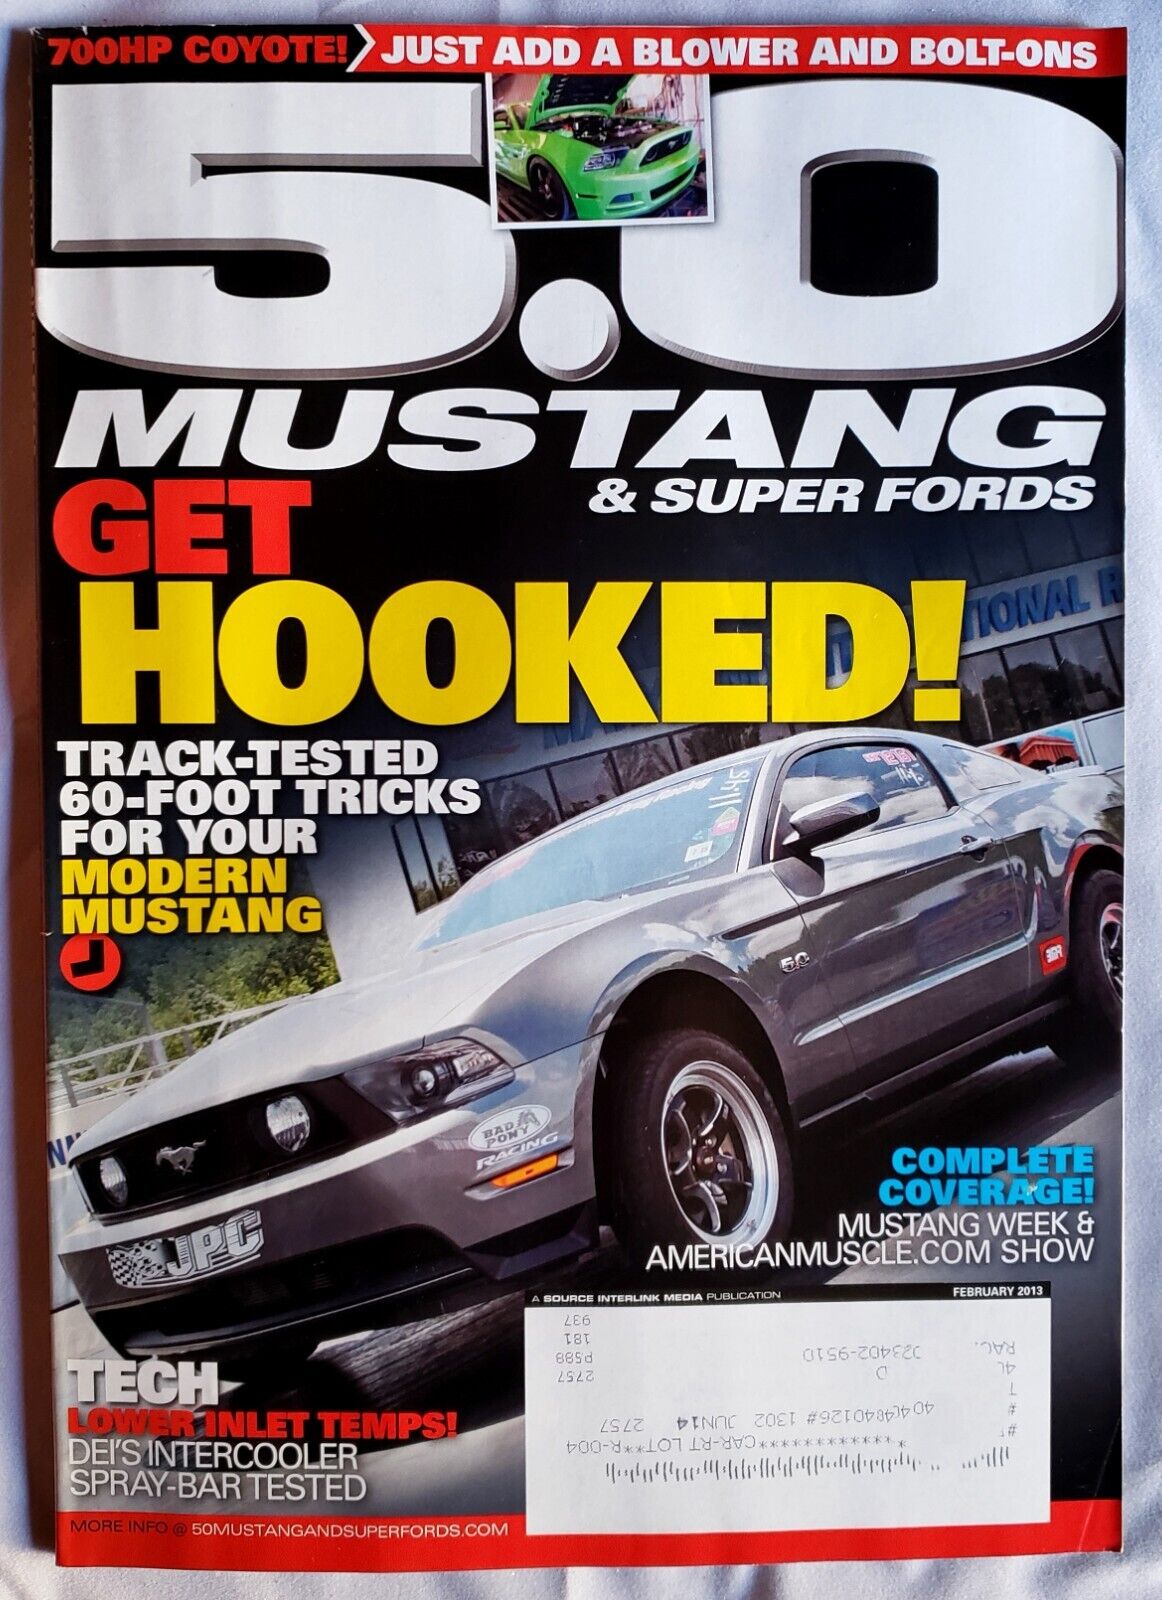 5.0 Mustang & Super Fords - 2013 Feb - Auto Car Performance Magazine